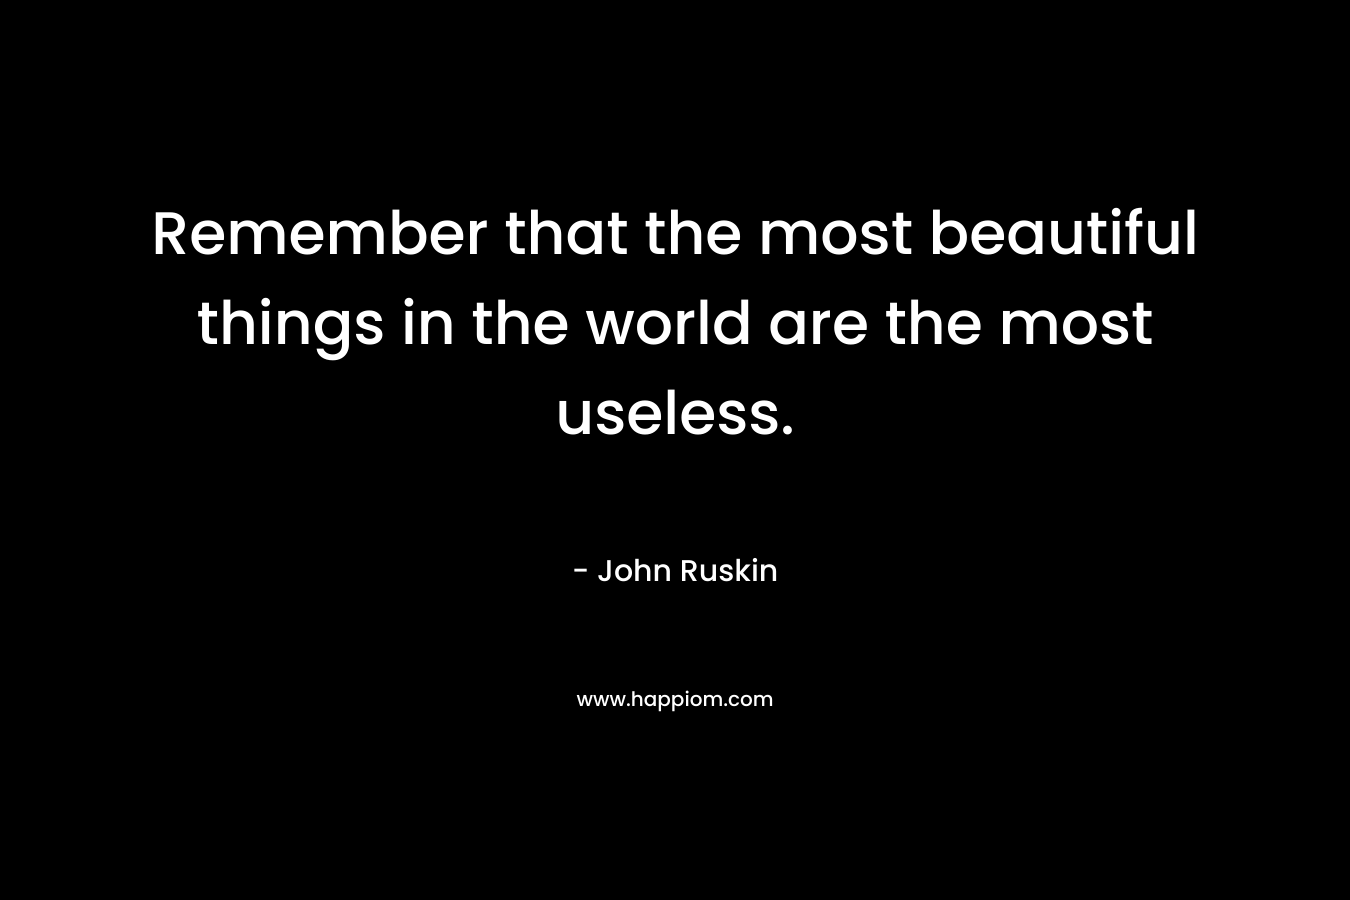 Remember that the most beautiful things in the world are the most useless.